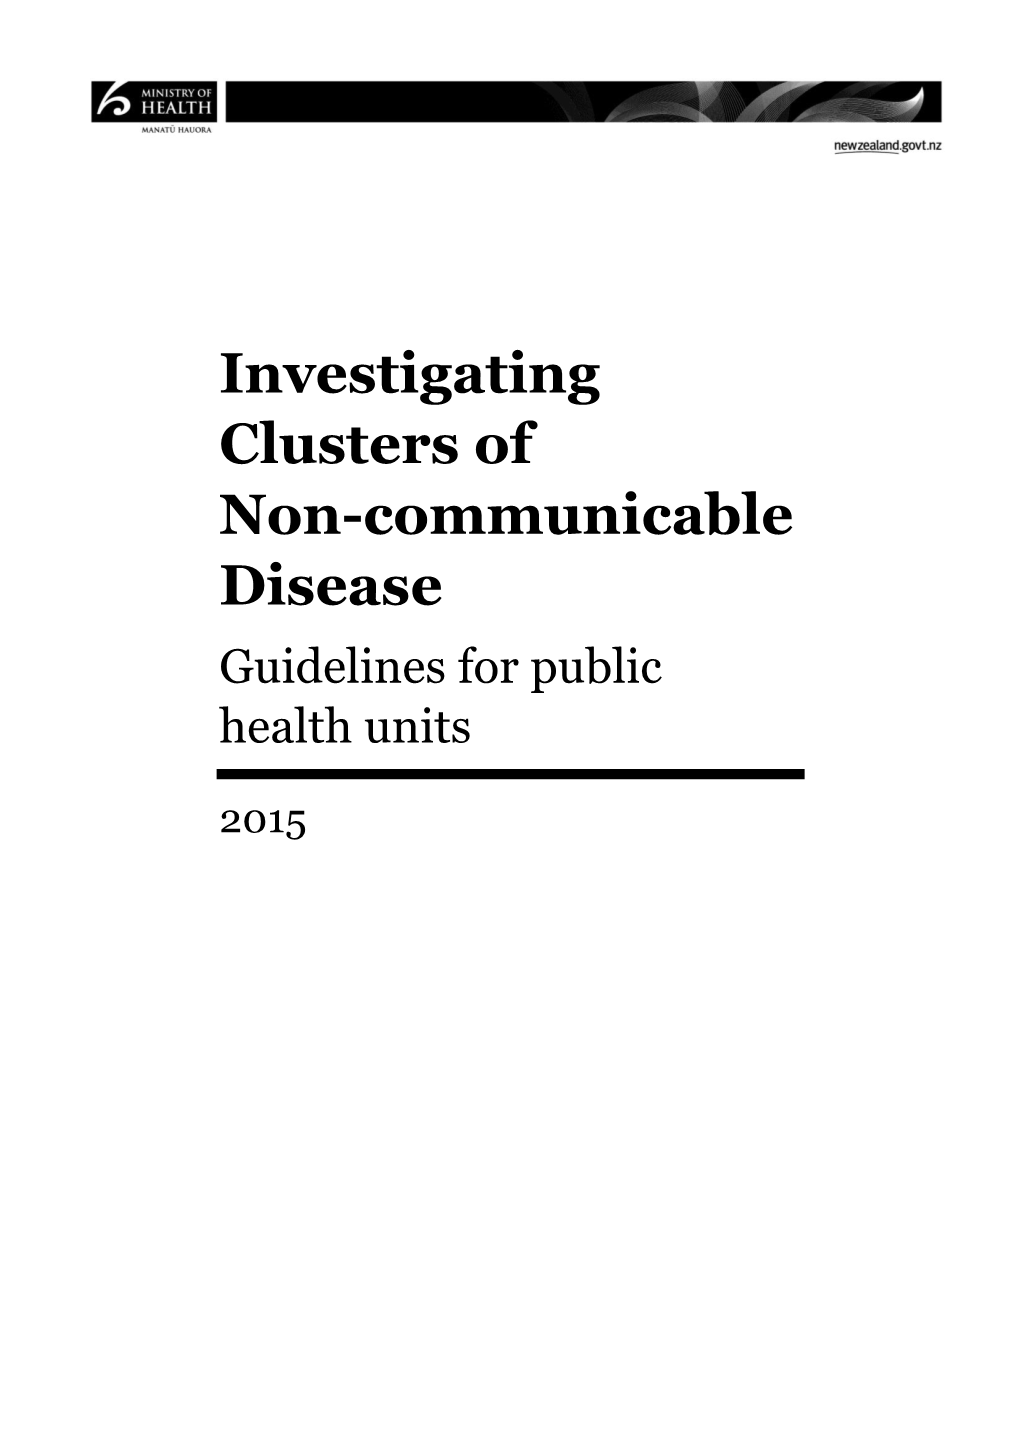 Investigating Clusters of Non-Communicable Disease Guidelines for Public Health Units